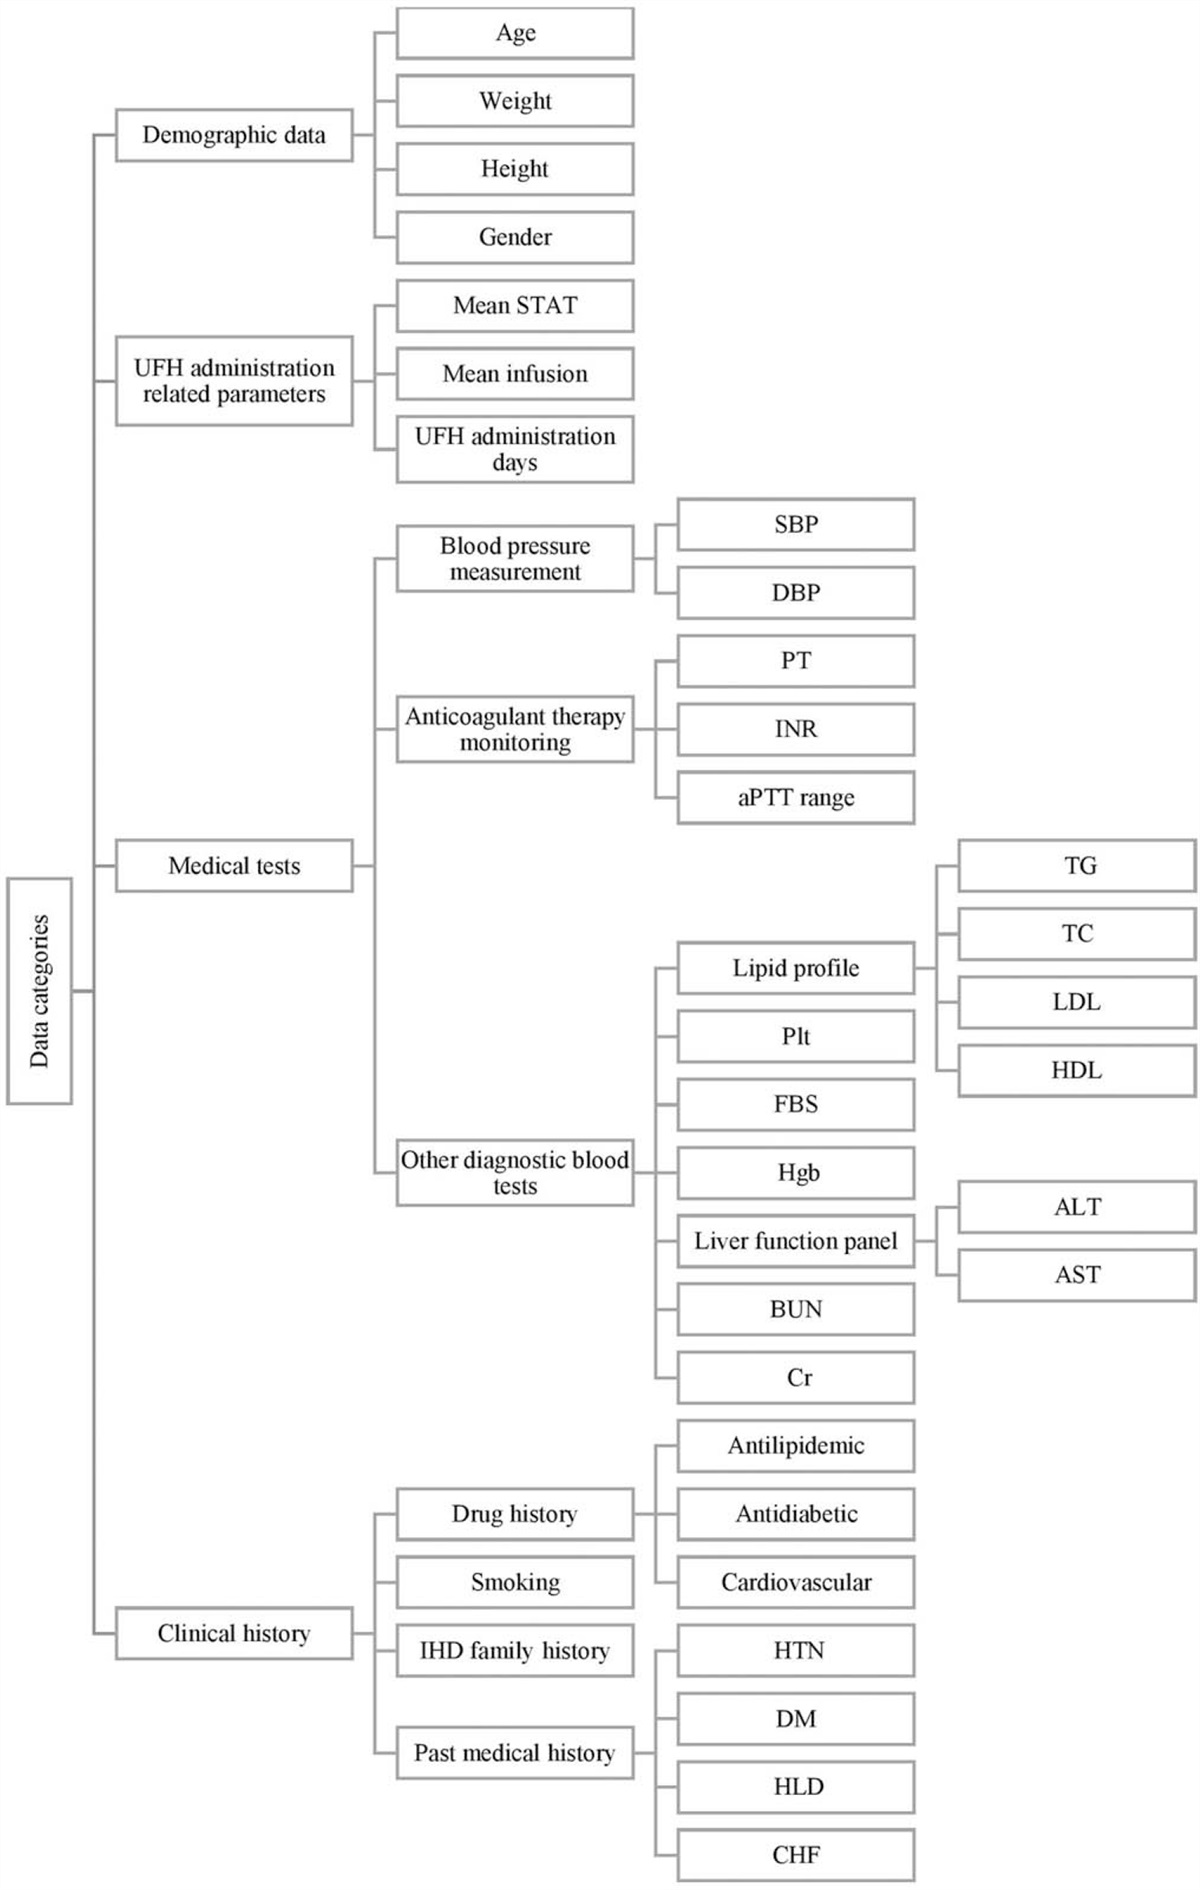 Evaluation of the activated partial thromboplastin time and its influential factors in ischemic heart disease patients under heparin treatment